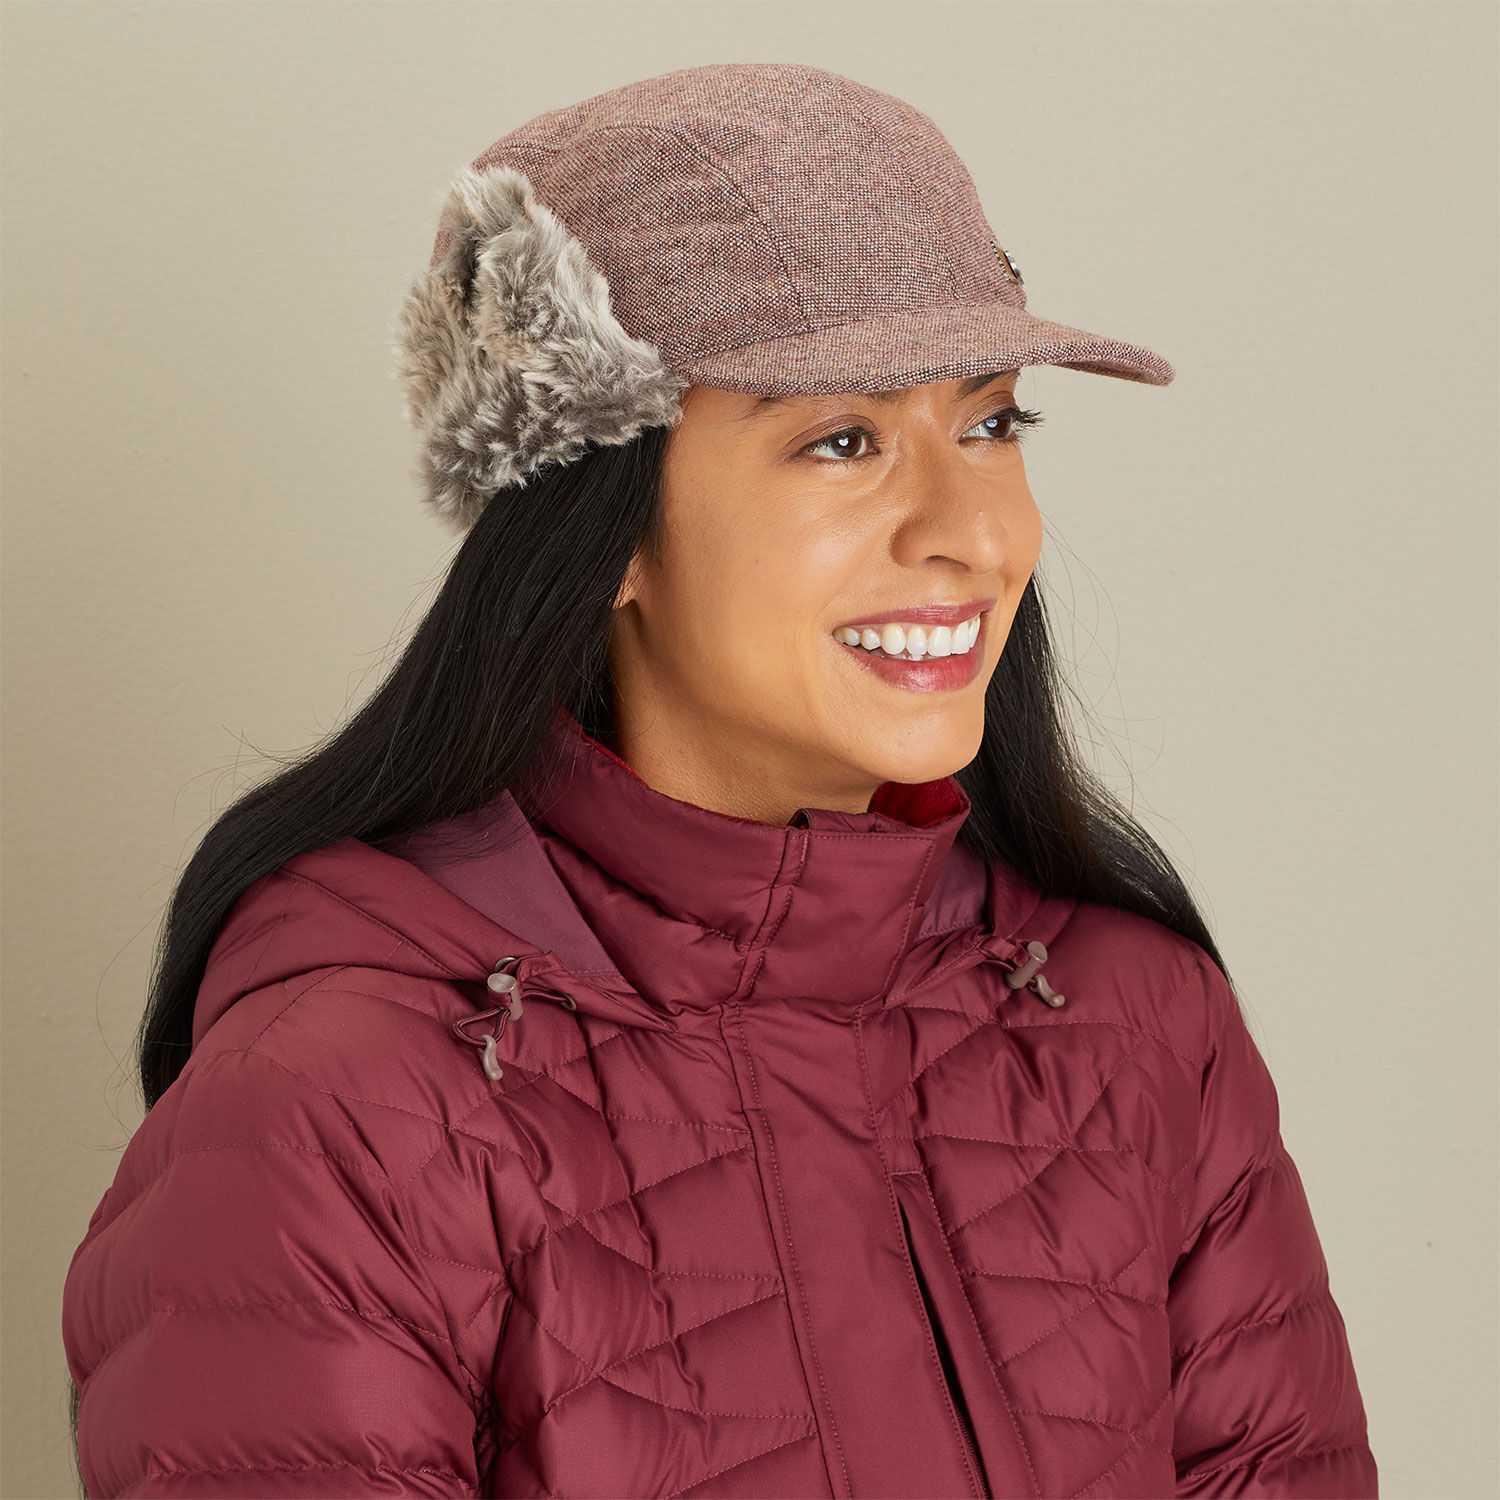 Wholesale Chullos: Norway Ski Hat with Ear Flaps - Fleece Lining